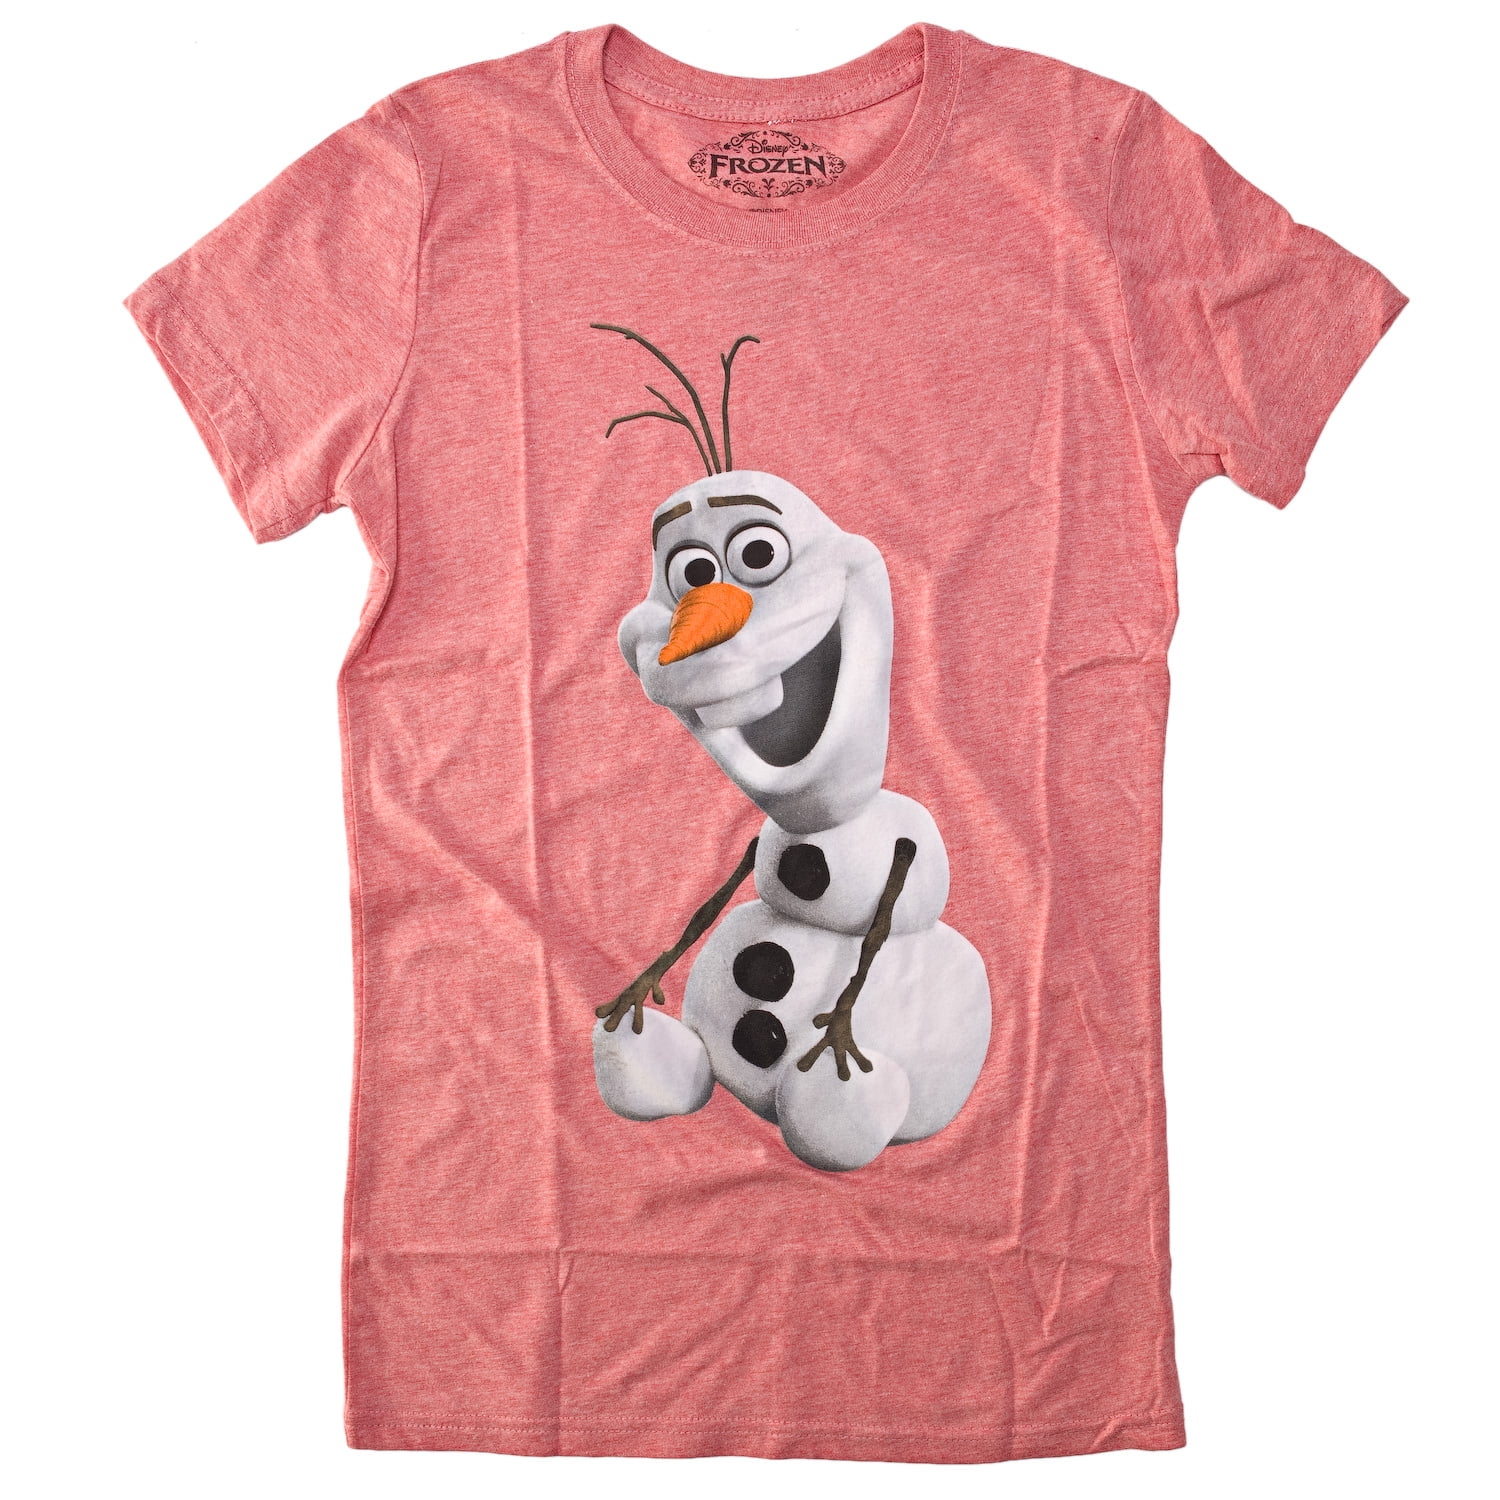 Food and Wine Shirts/I Like Cold Beers Shirt/Olaf/Frozen/Princess